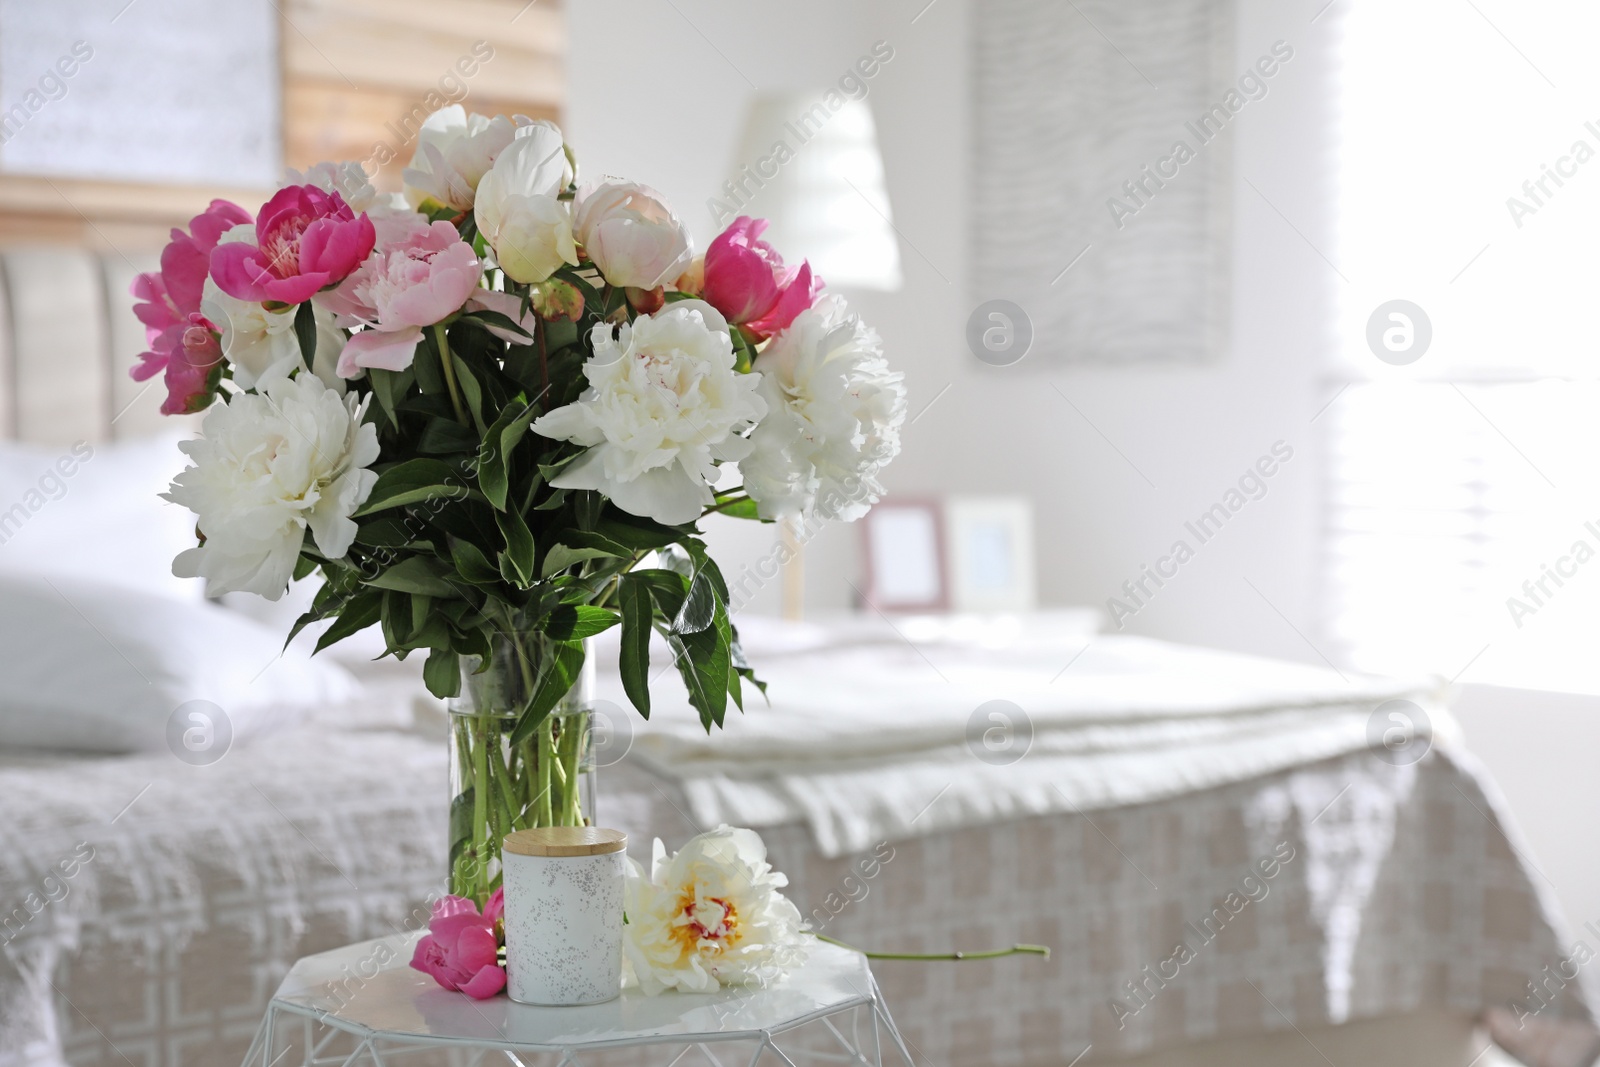 Photo of Beautiful blooming peonies on table in bedroom. Space for text